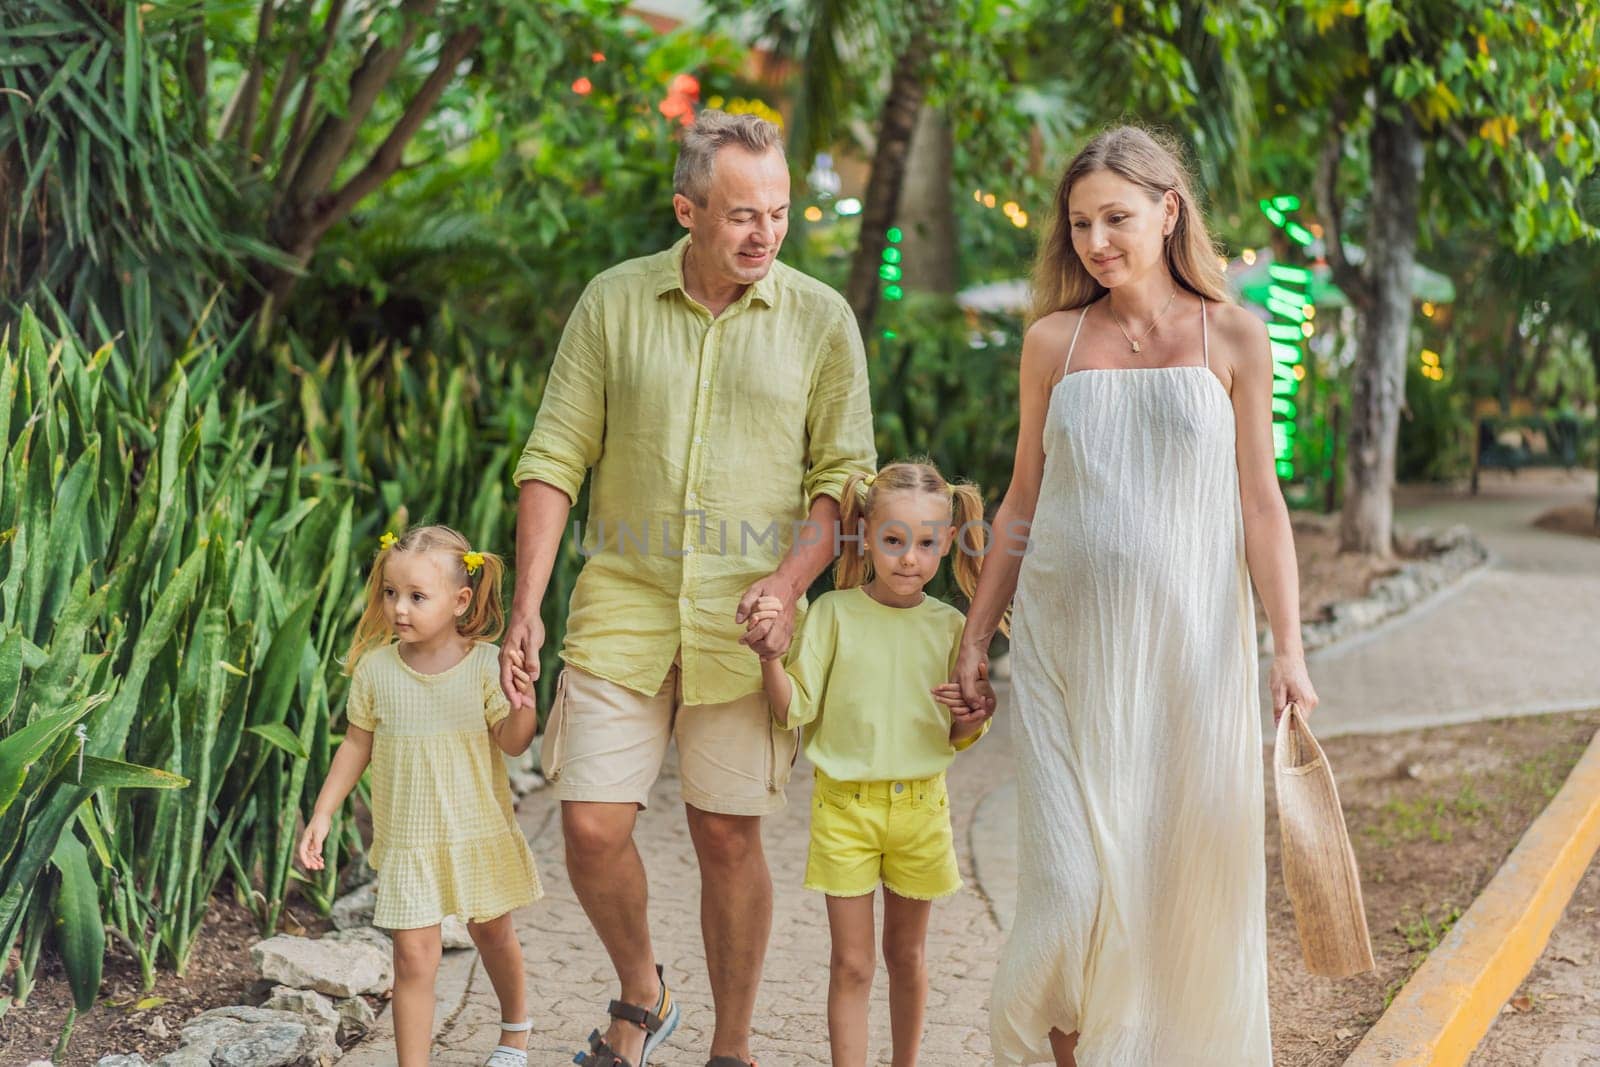 A joyful family, two girls, dad, and a pregnant mom, bask in tropical resort, celebrating a radiant pregnancy amidst paradise.